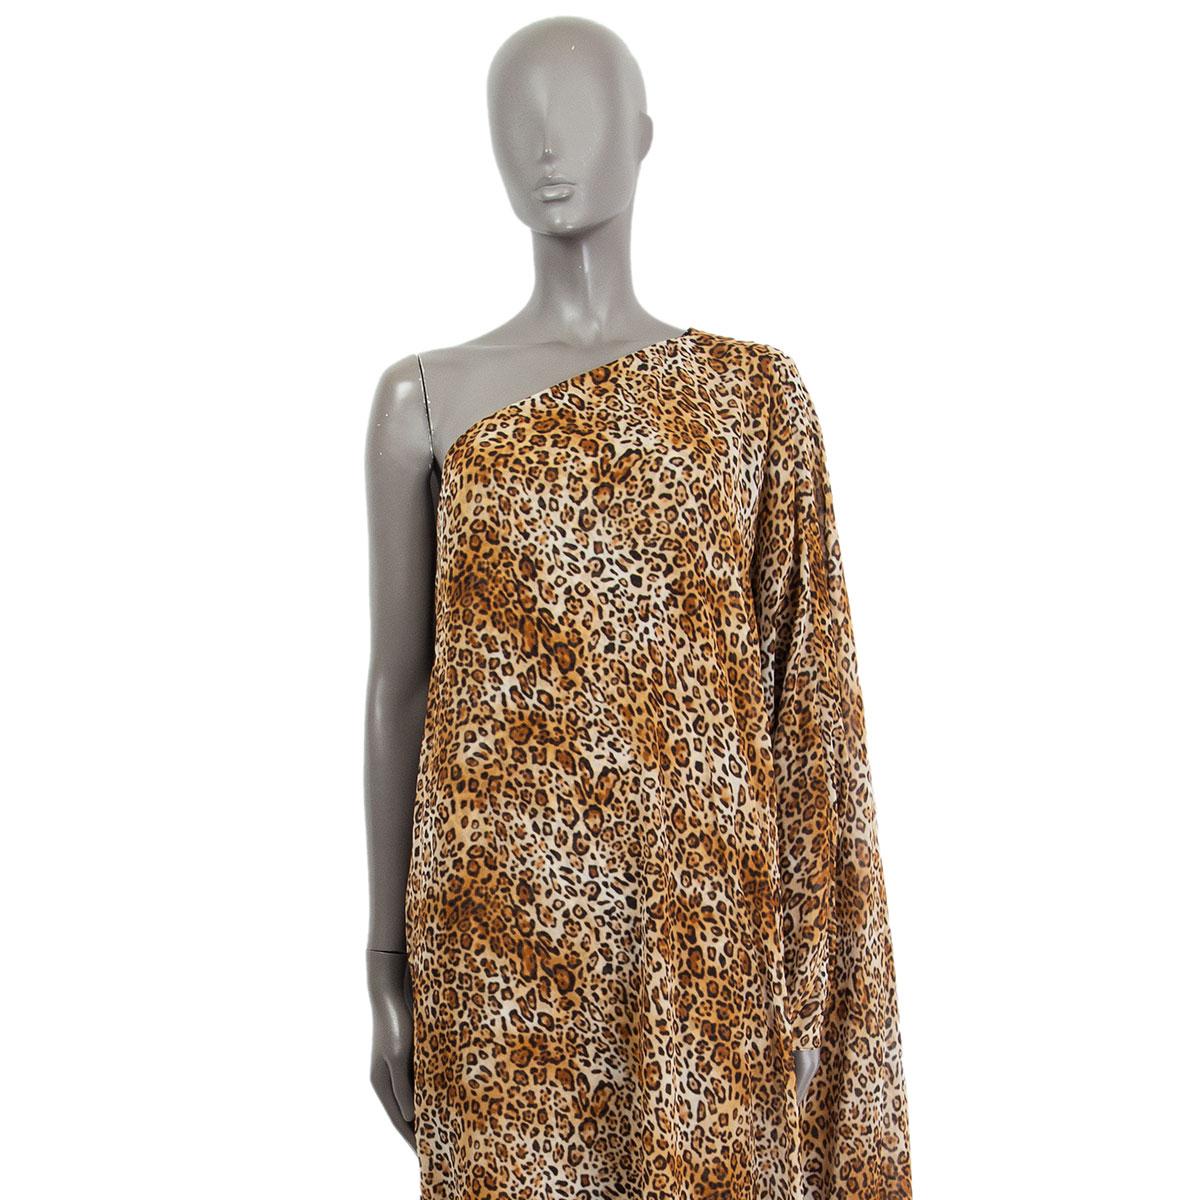 Saint Laurent leopard print one-shoulder kaftan in black, brown, beige and off-white silk (100%). Closes on the side with a concealed zipper. Lined in silk (100%). Has been worn and is in excellent condition. 

Tag Size 42
Size L
Bust 90cm